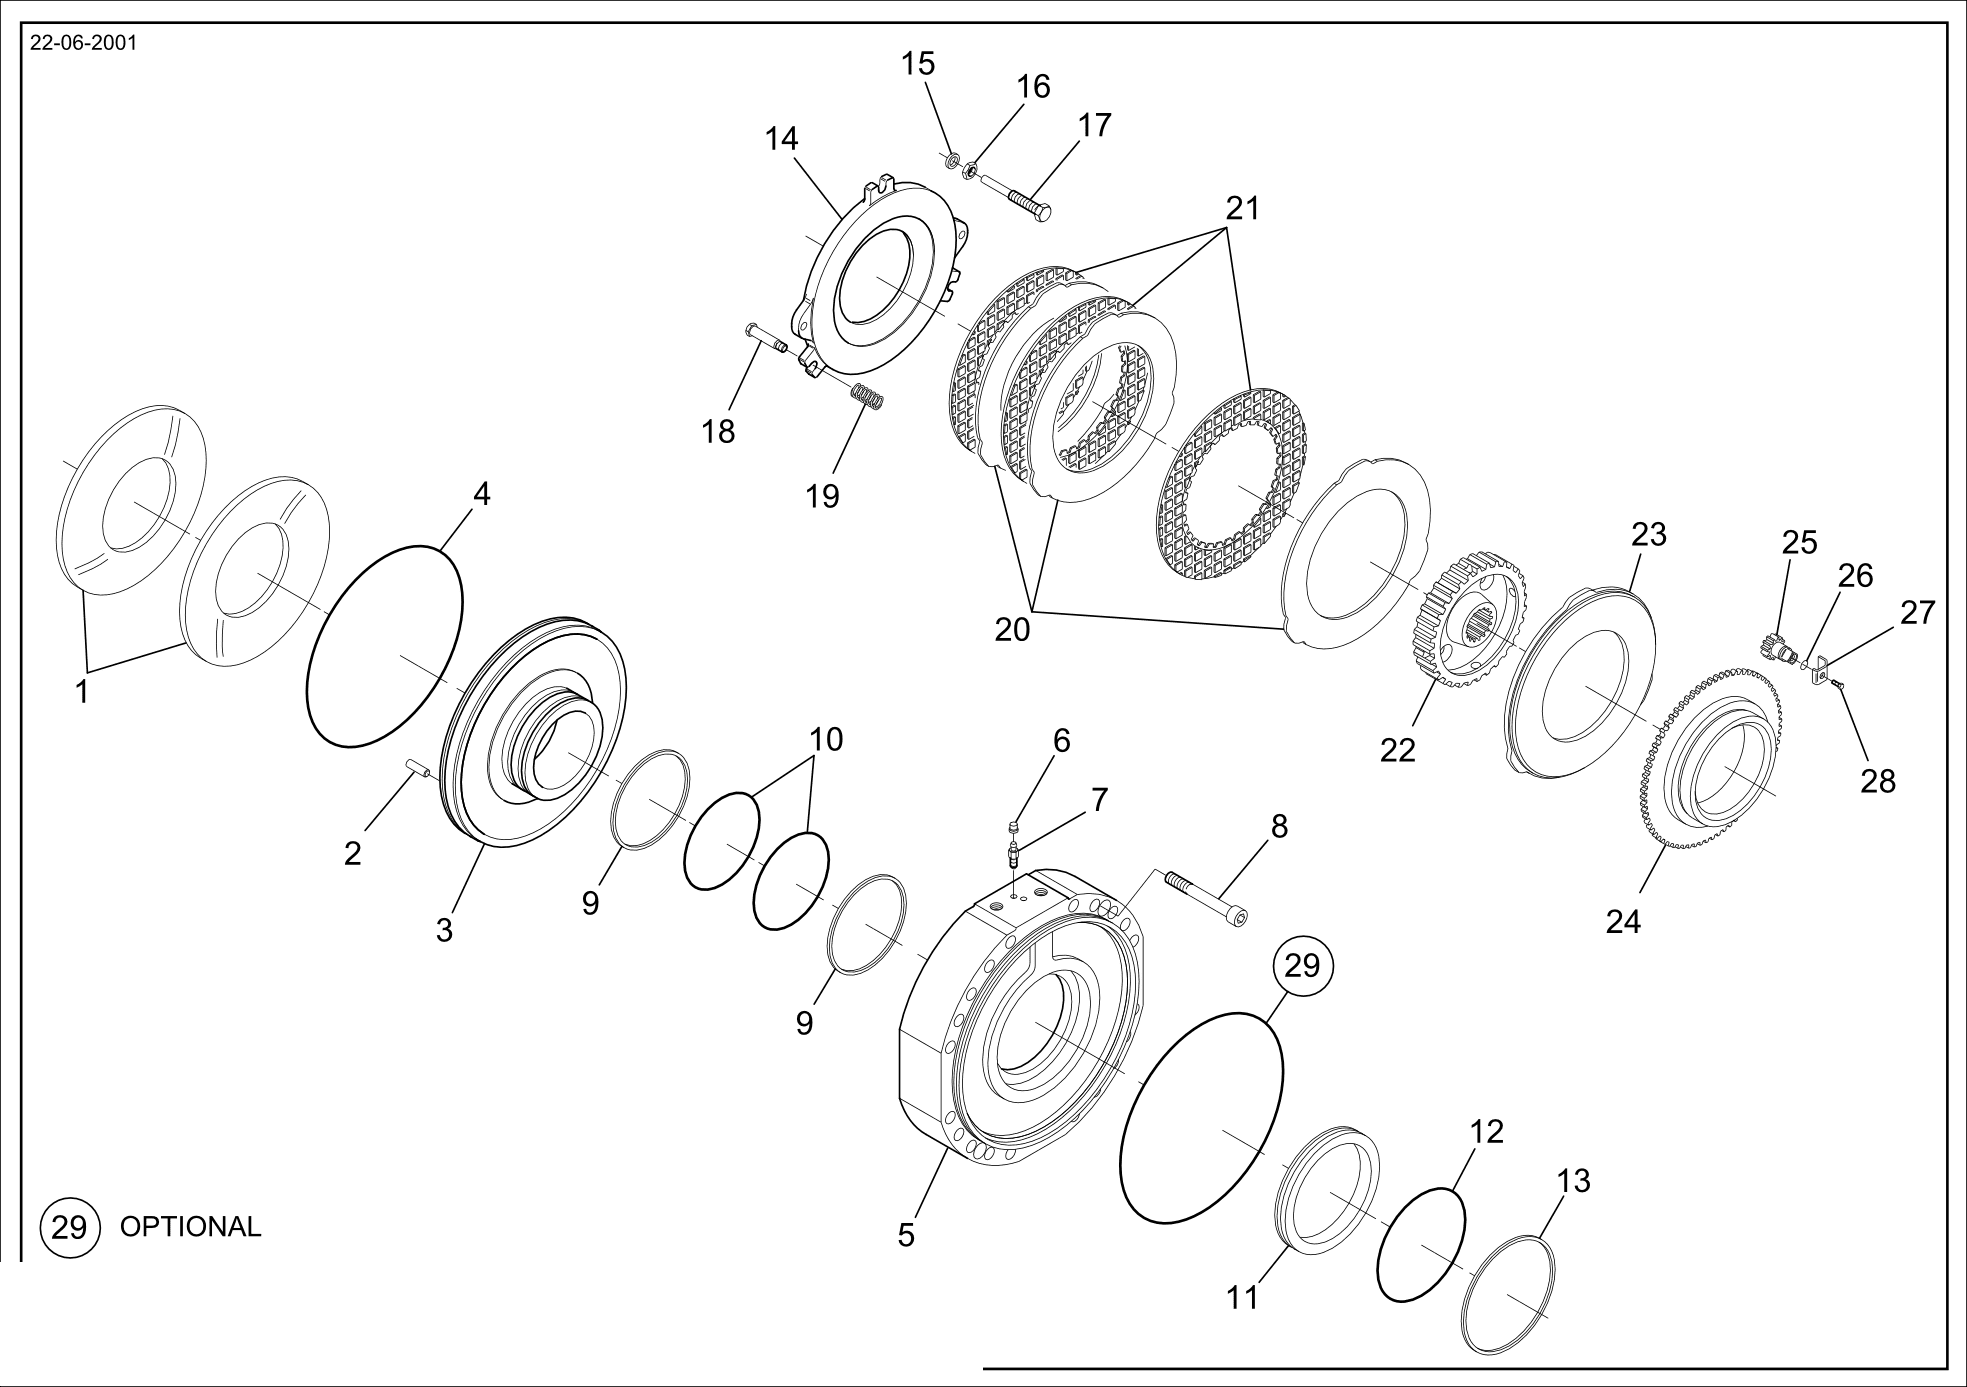 drawing for MERLO 048695 - O - RING (figure 5)